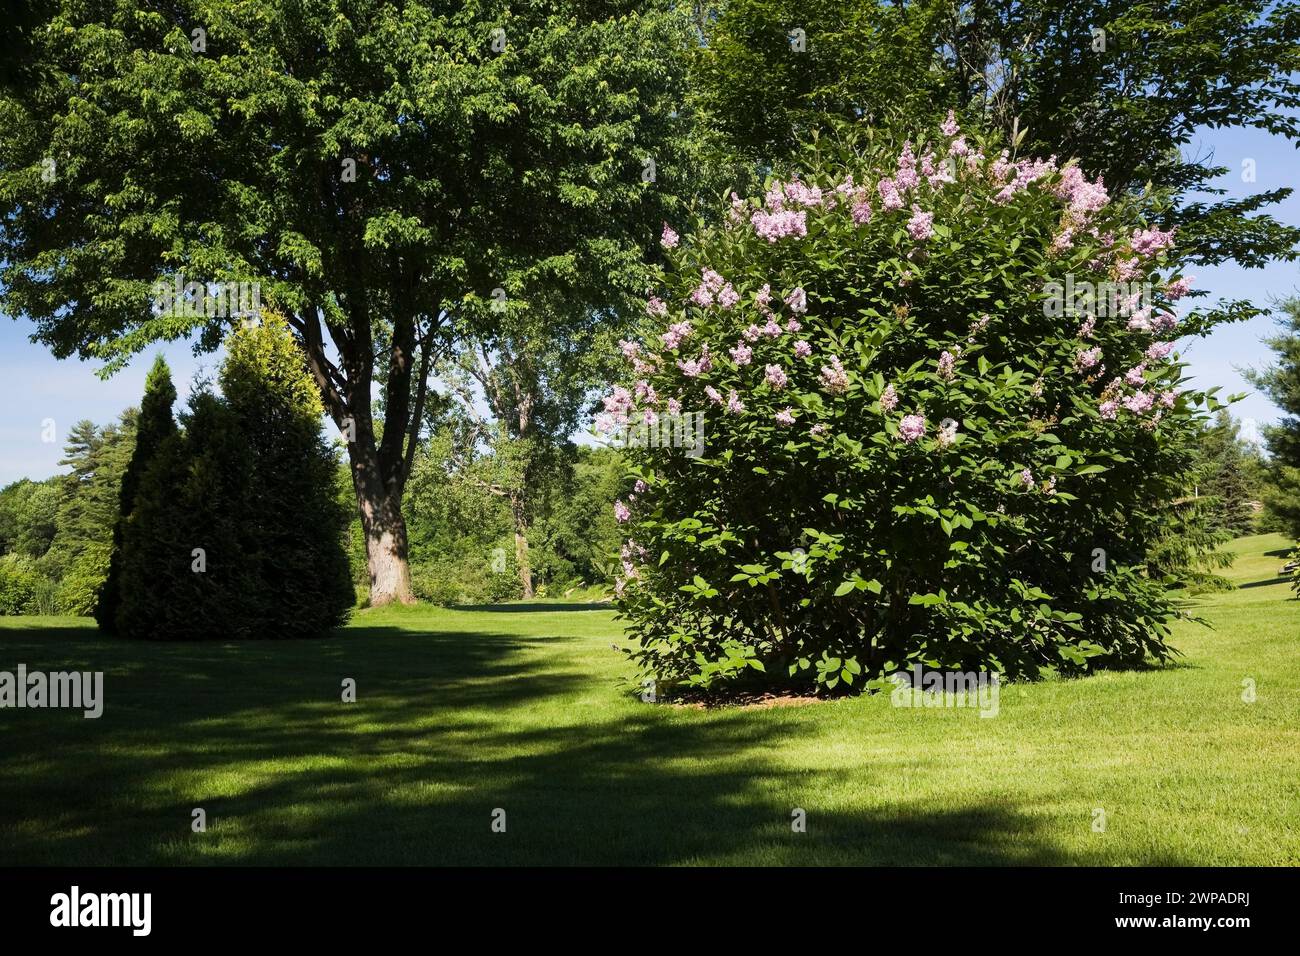 Syringa vulgaris - Lilac and silhouetted Thuja occidentalis - Cedar trees in backyard garden in late spring. Stock Photo